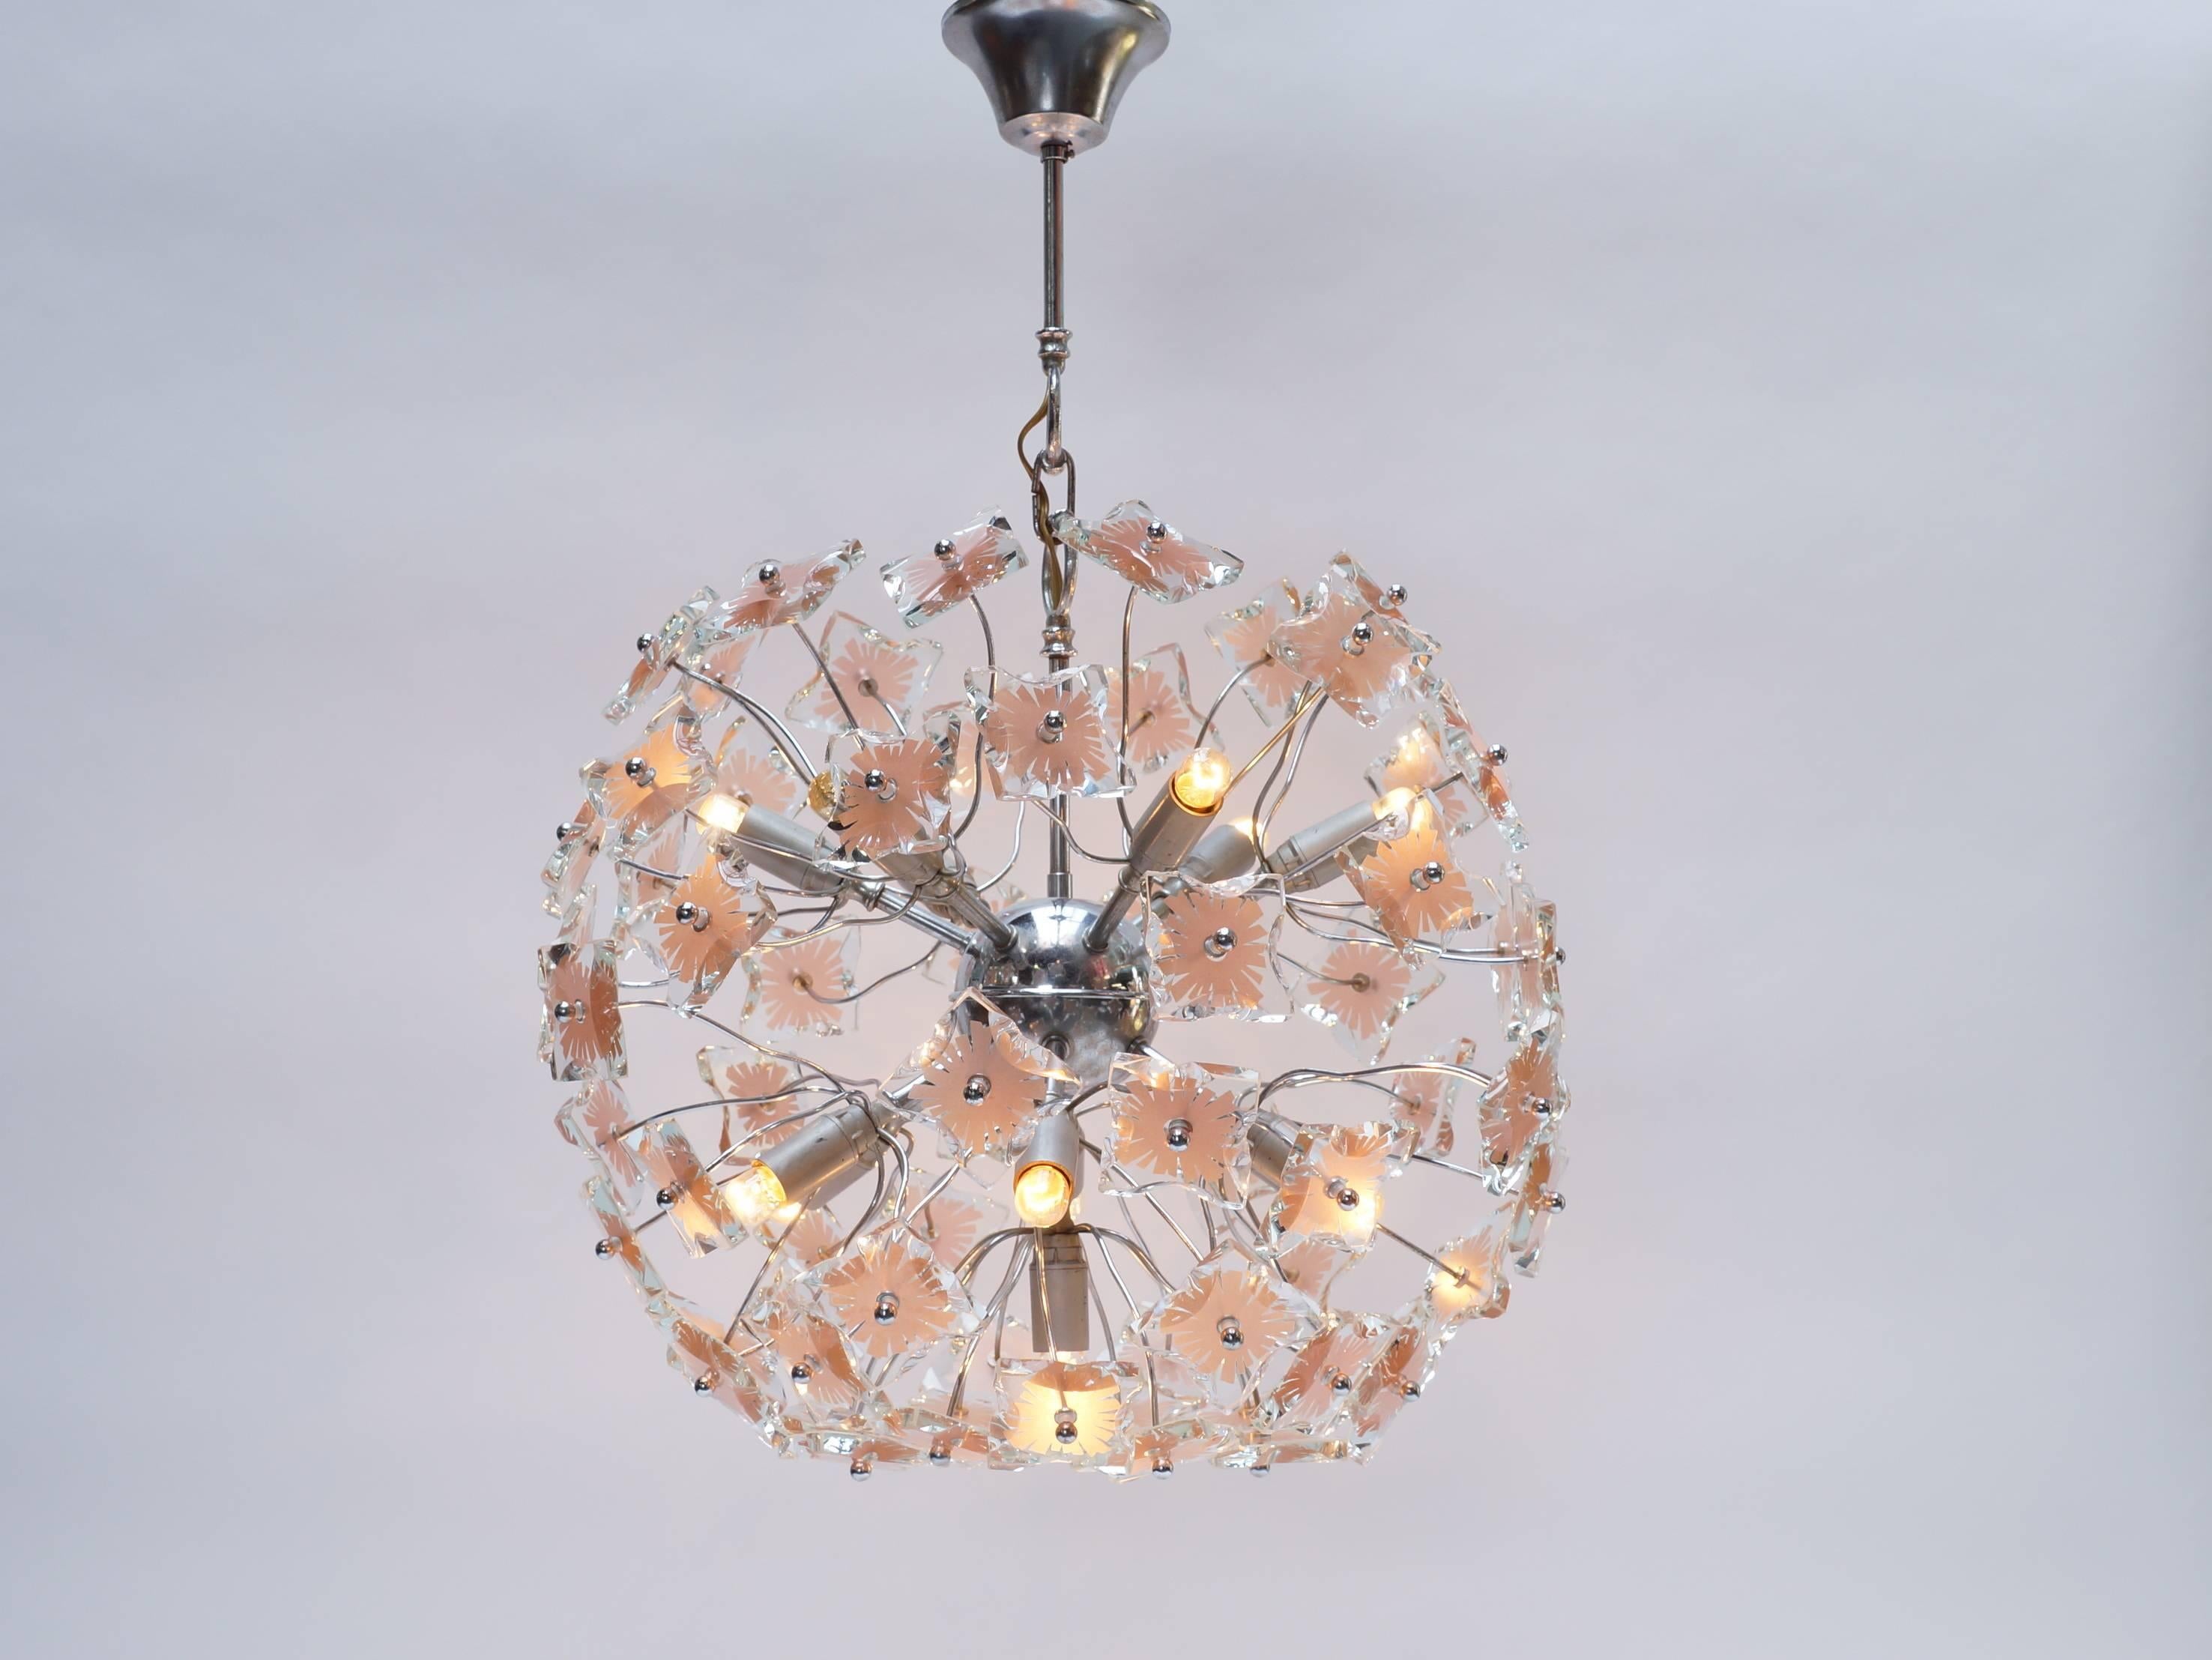 Stunning Mid-Century Chandelier in the style of Fontana Arte with eleven lights (E14) Madden the 1970s in the style of Italian Sputnik chandeliers but then with glass. This lamp is in very good condition and fully working. When its turned off it